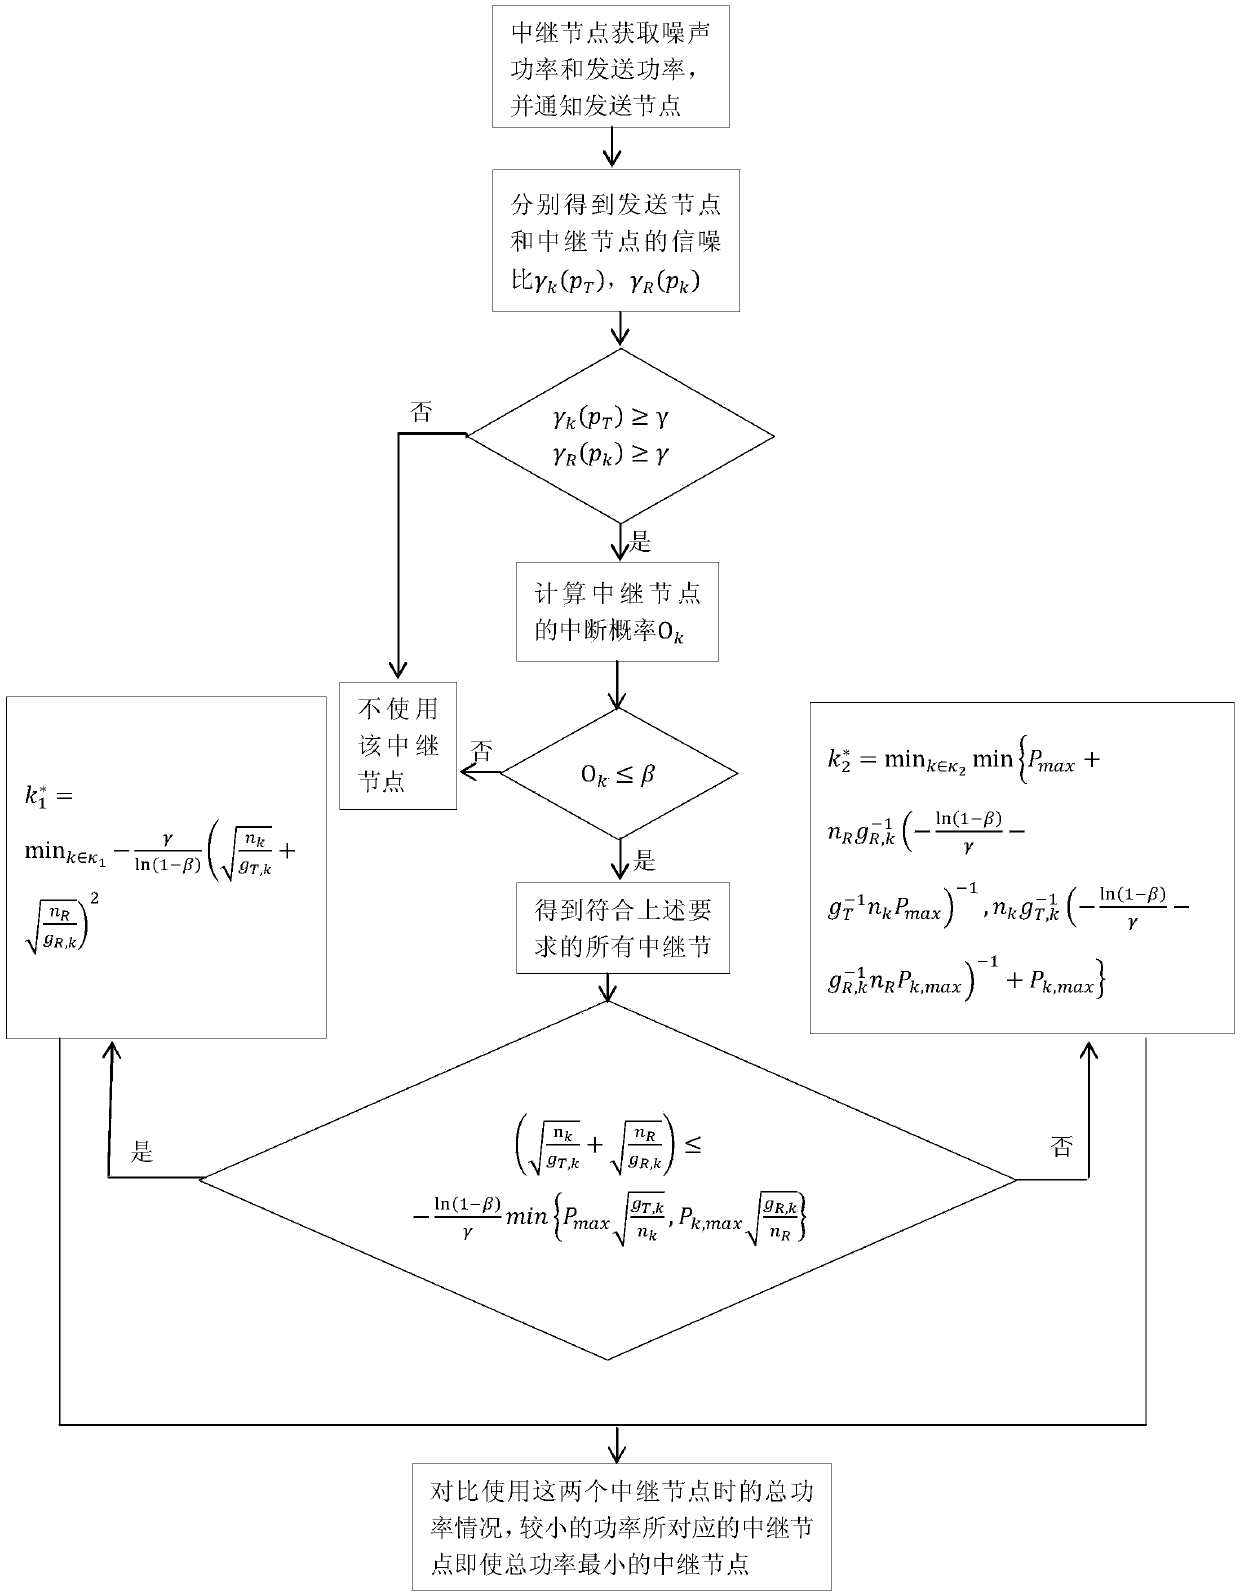 Relay node selection method for minimizing end-to-end sending power in Rayleigh fading channel